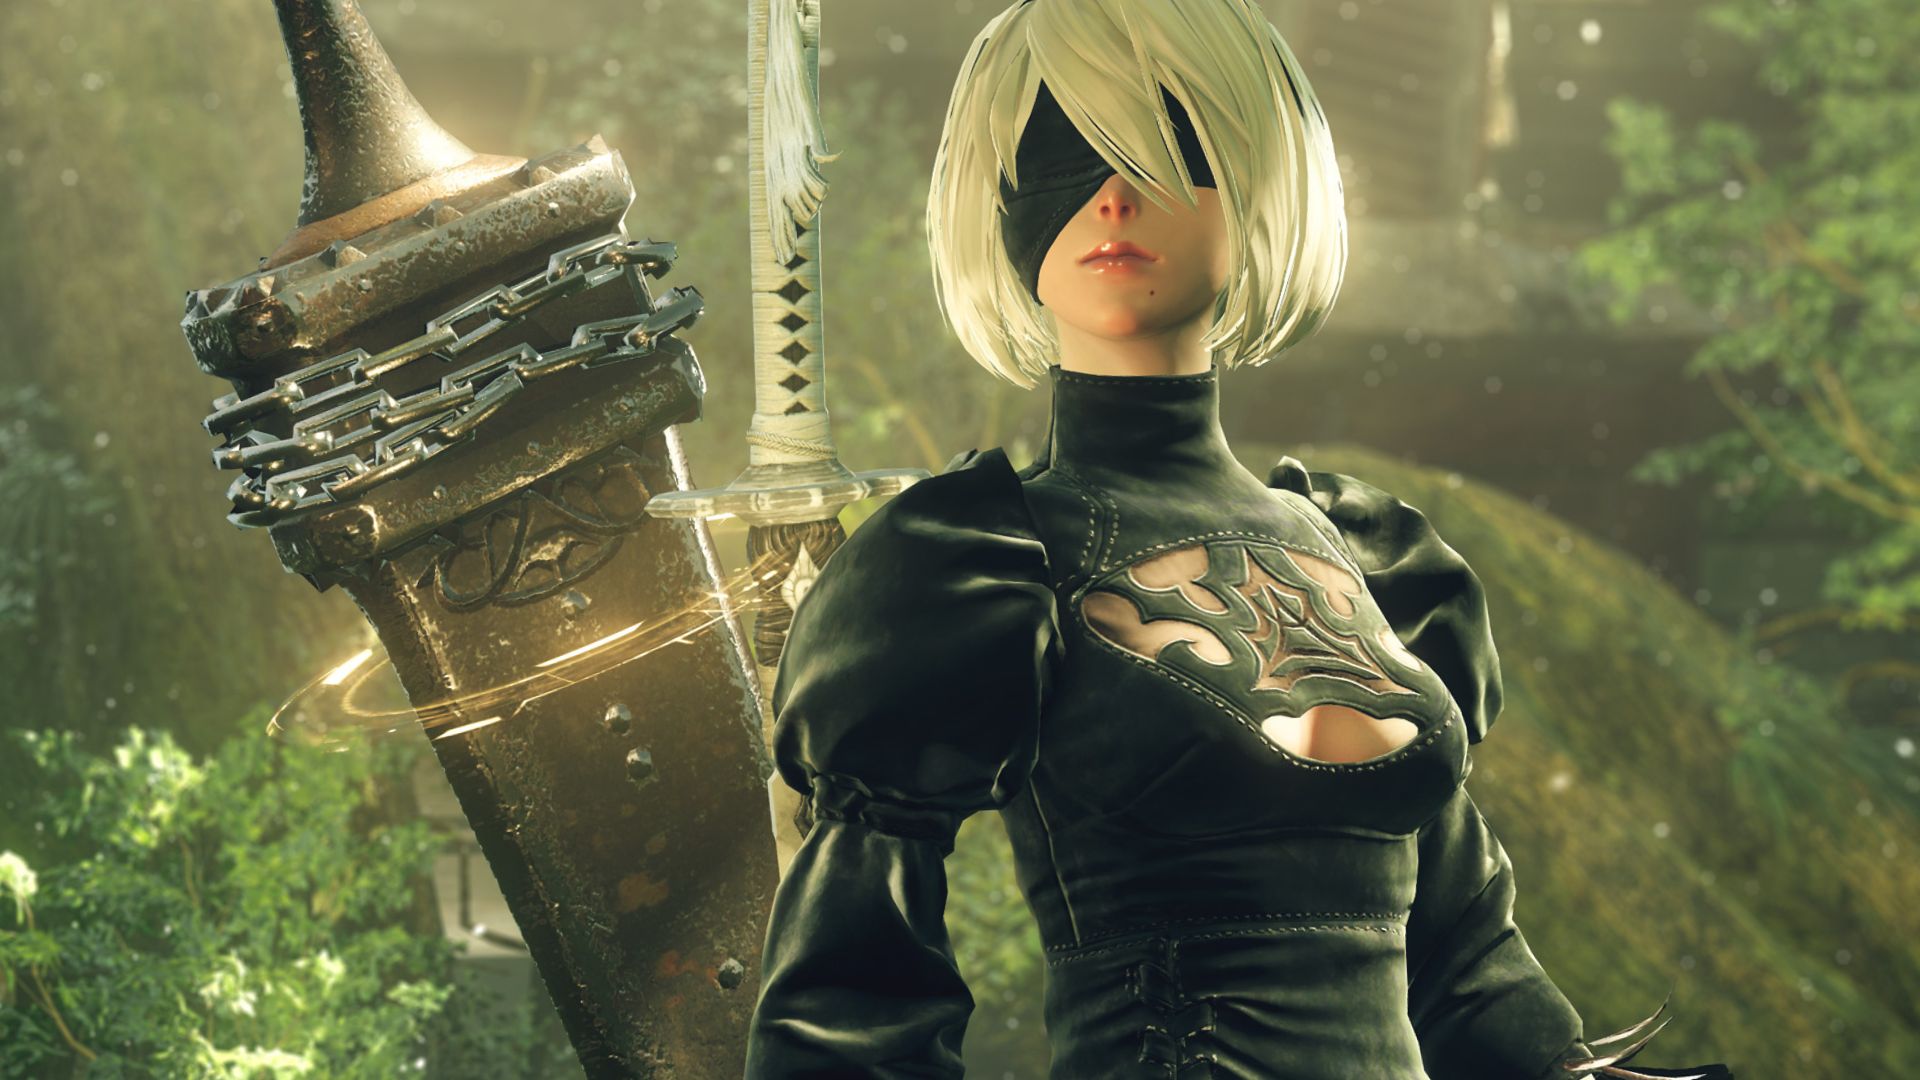 oor tuin Keizer All of the Nier Automata endings and how to get them | Pocket Tactics